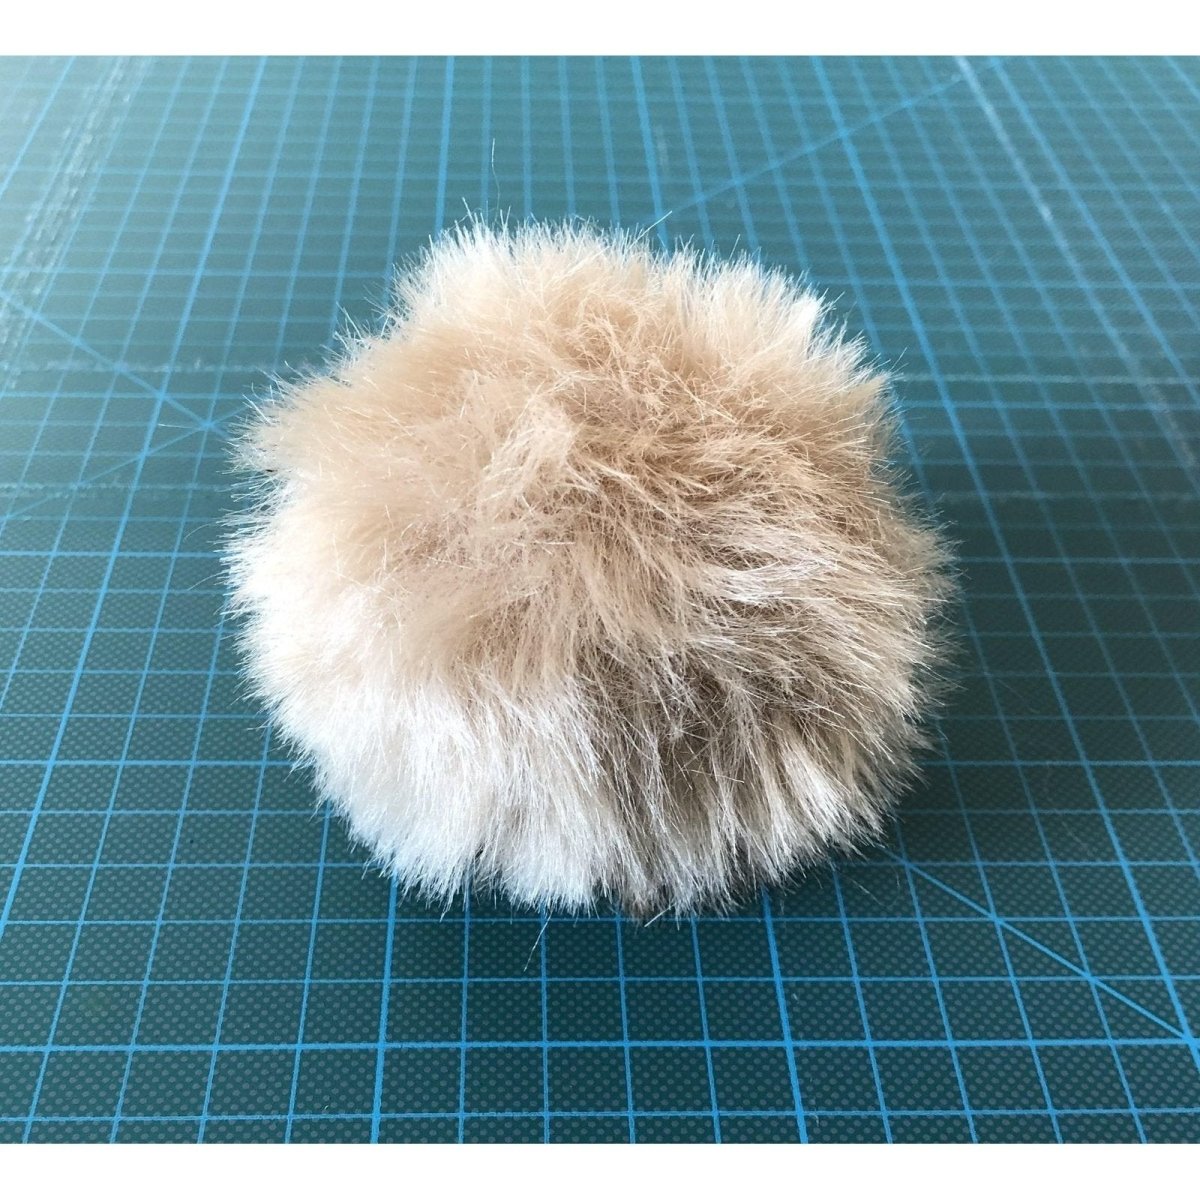 Faux Fur Brown Pom Poms - Bibs And Boots Fabric